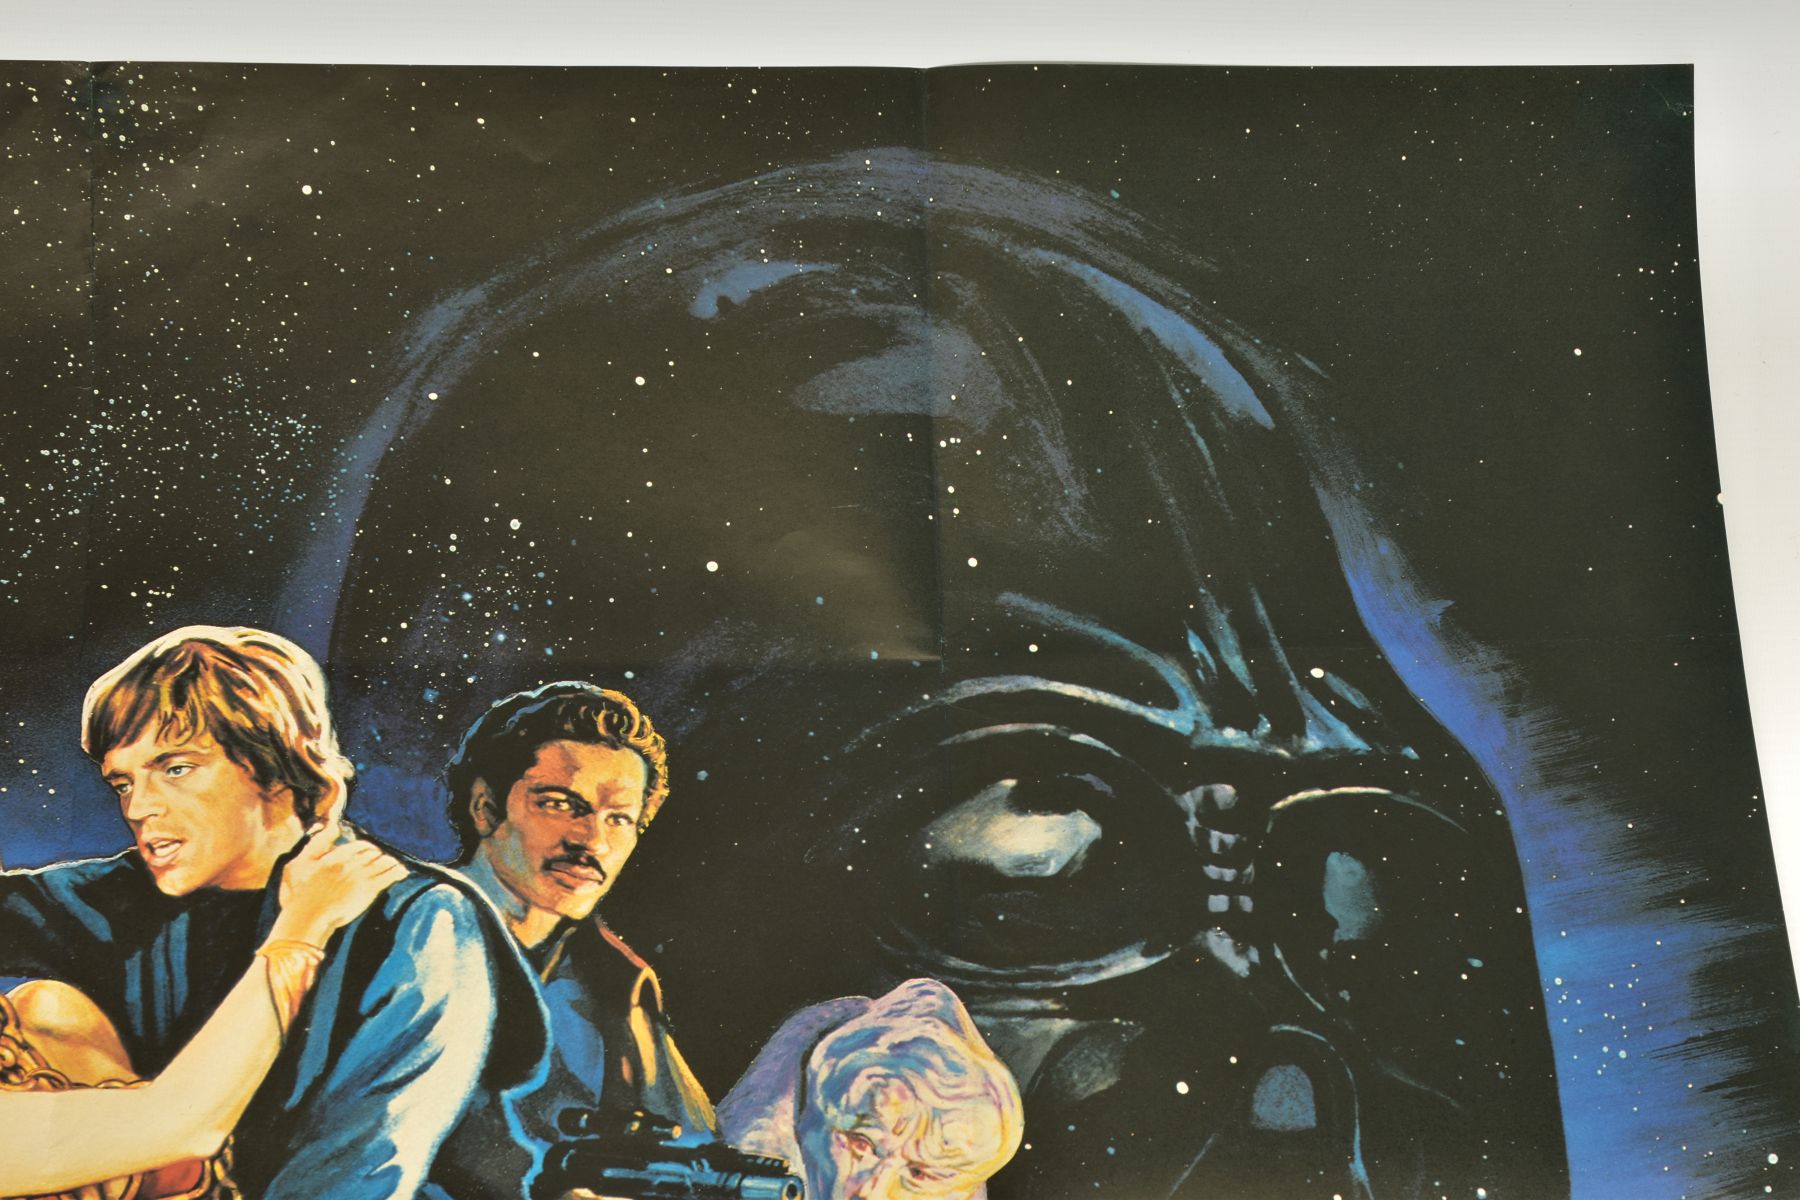 STAR WARS THE RETURN OF THE JEDI 1983, British quad film poster, artwork by printed by Lonsdale & - Image 2 of 10